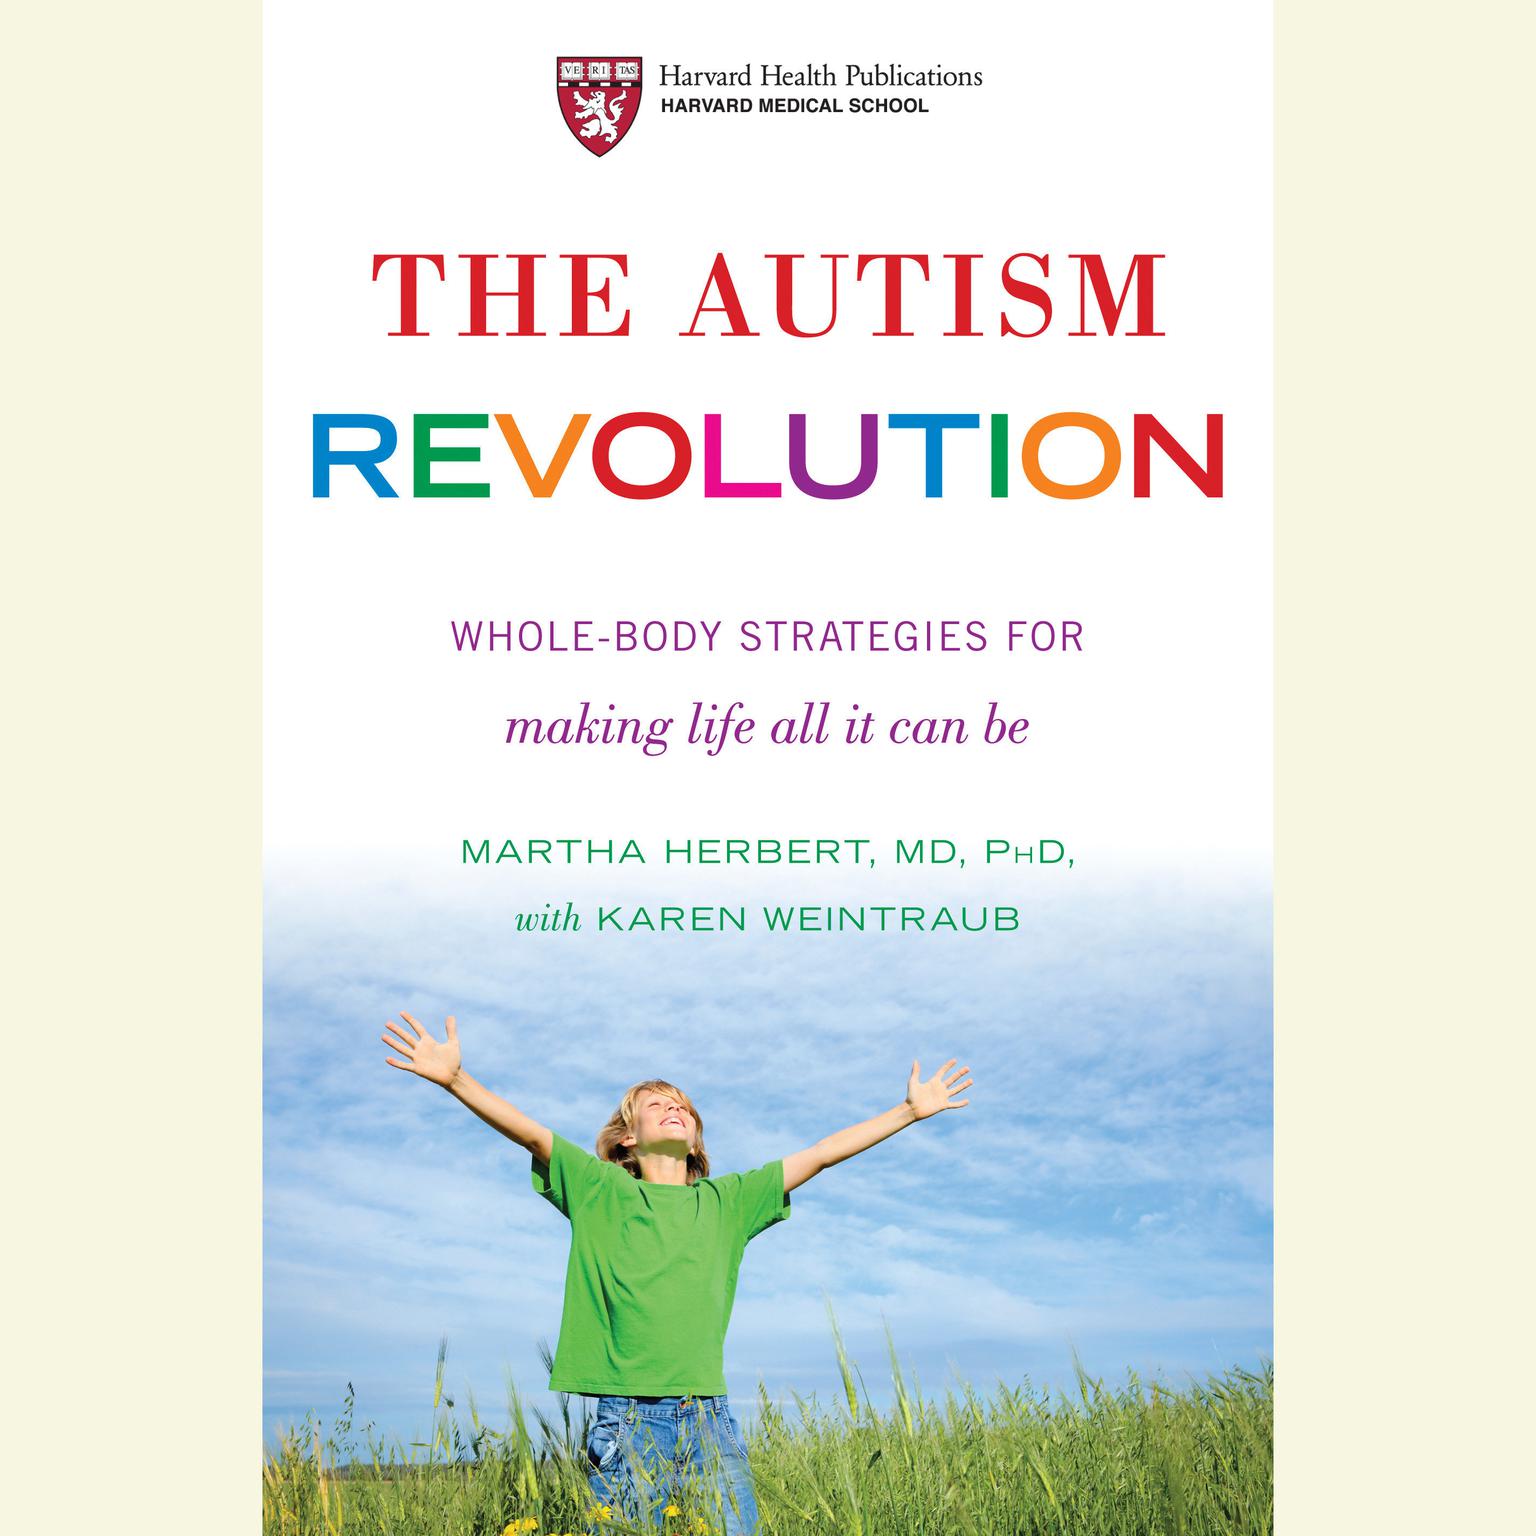 The Autism Revolution: Whole-Body Strategies for Making Life All It Can Be Audiobook, by Martha Herbert